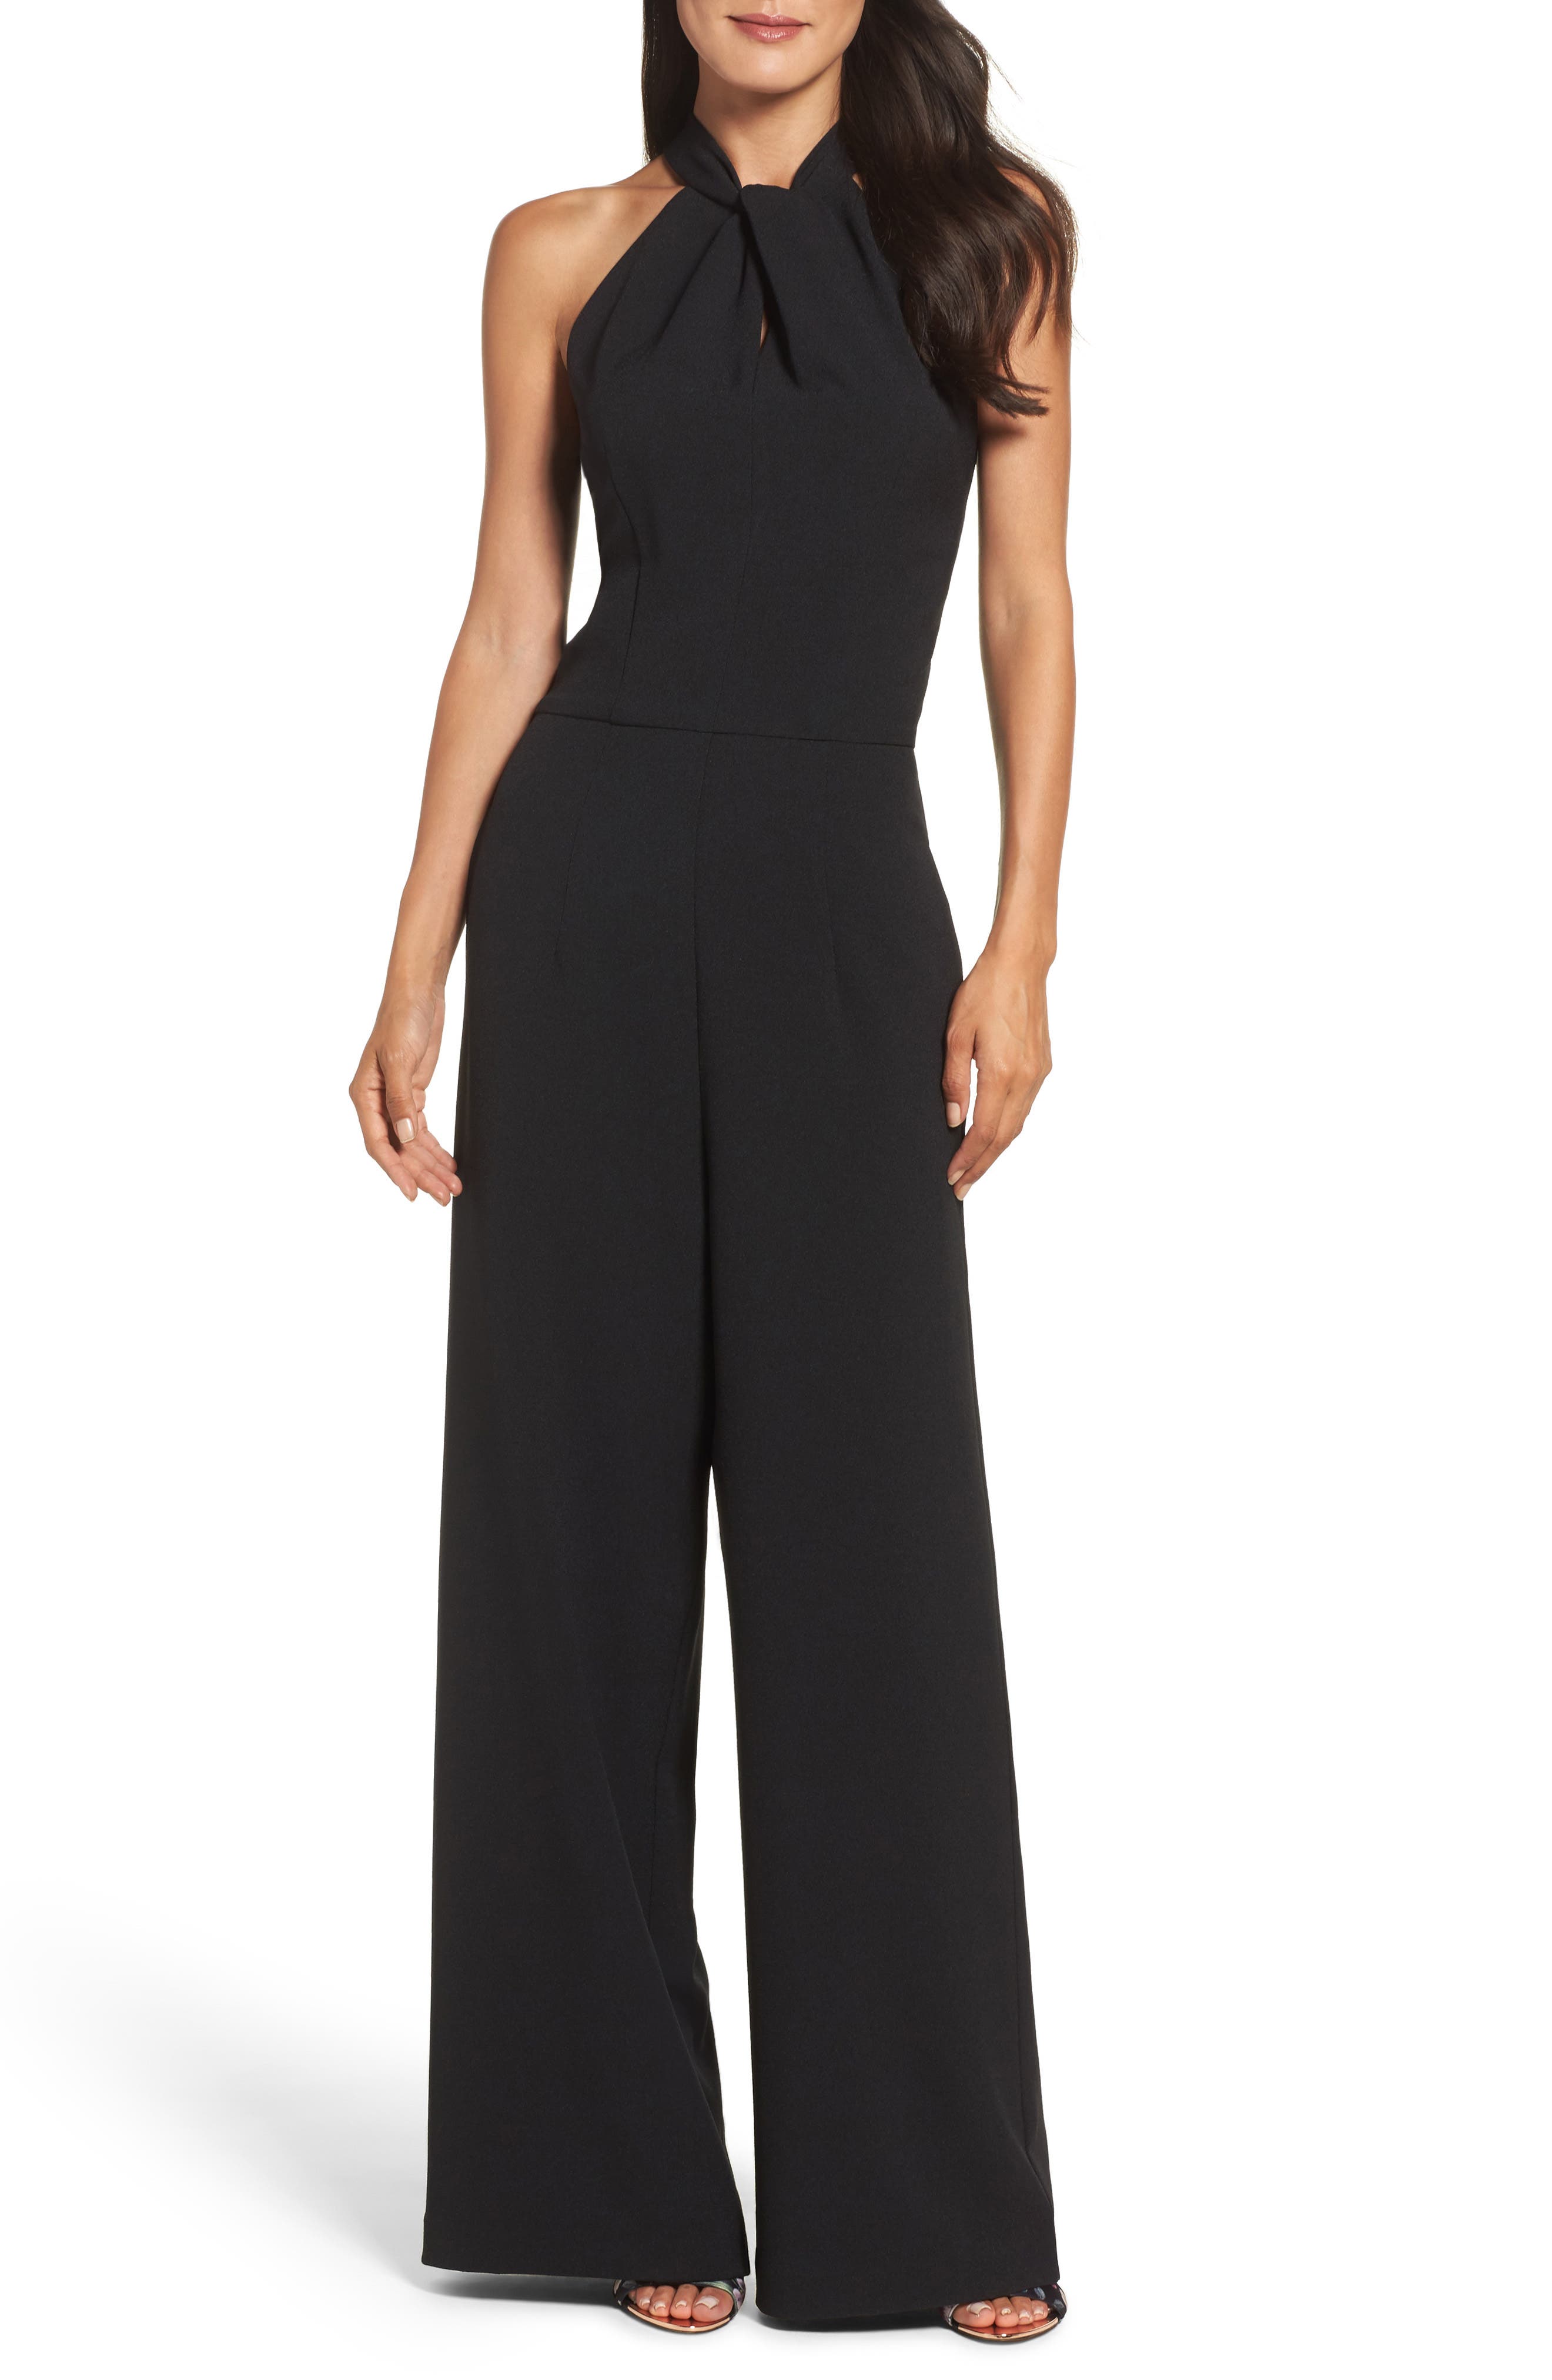 Lanston Synthetic Halter Jumpsuit Womens Clothing Jumpsuits and rompers Full-length jumpsuits and rompers 